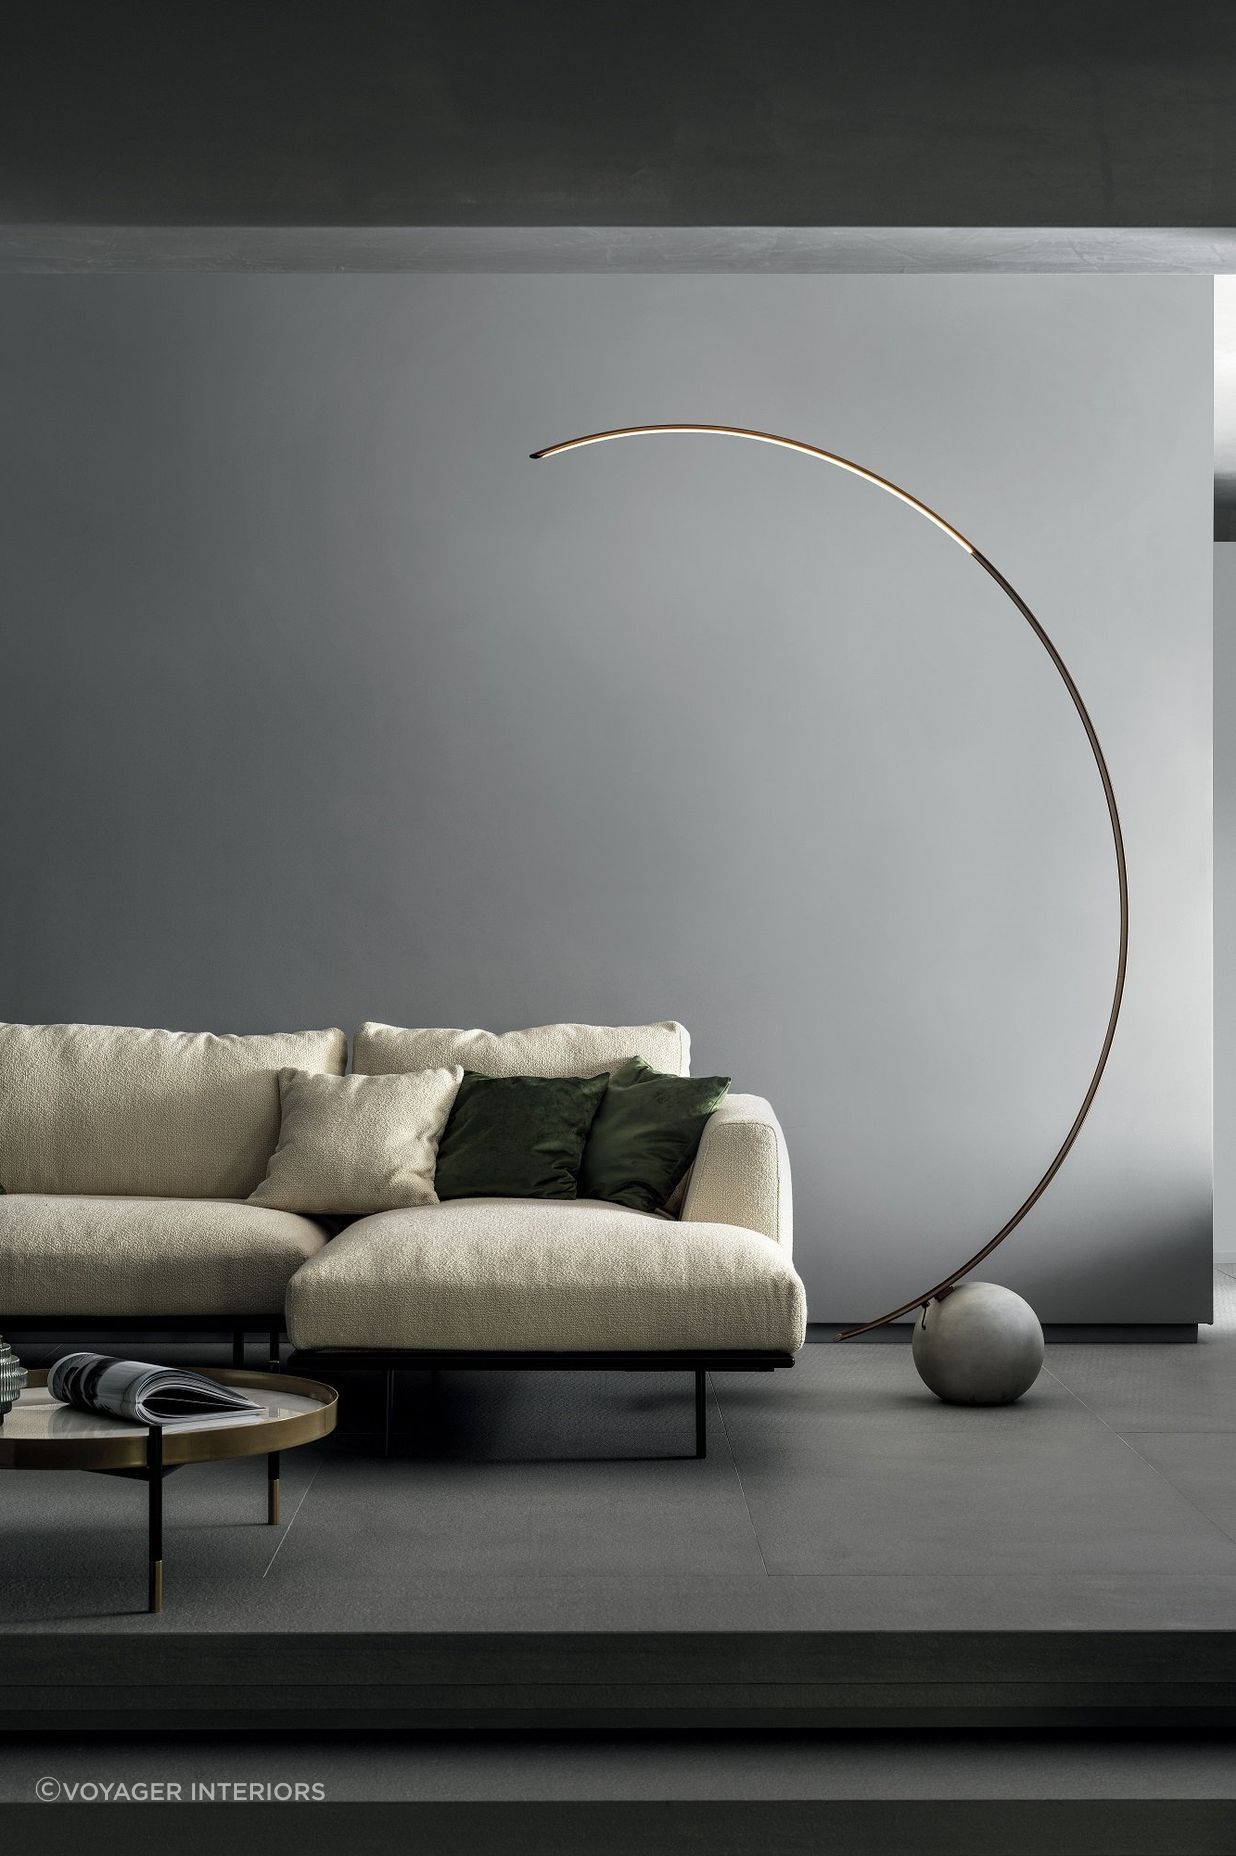 The stylish and distinctive Circle Floor Lamp can easily act as a statement piece in a room.